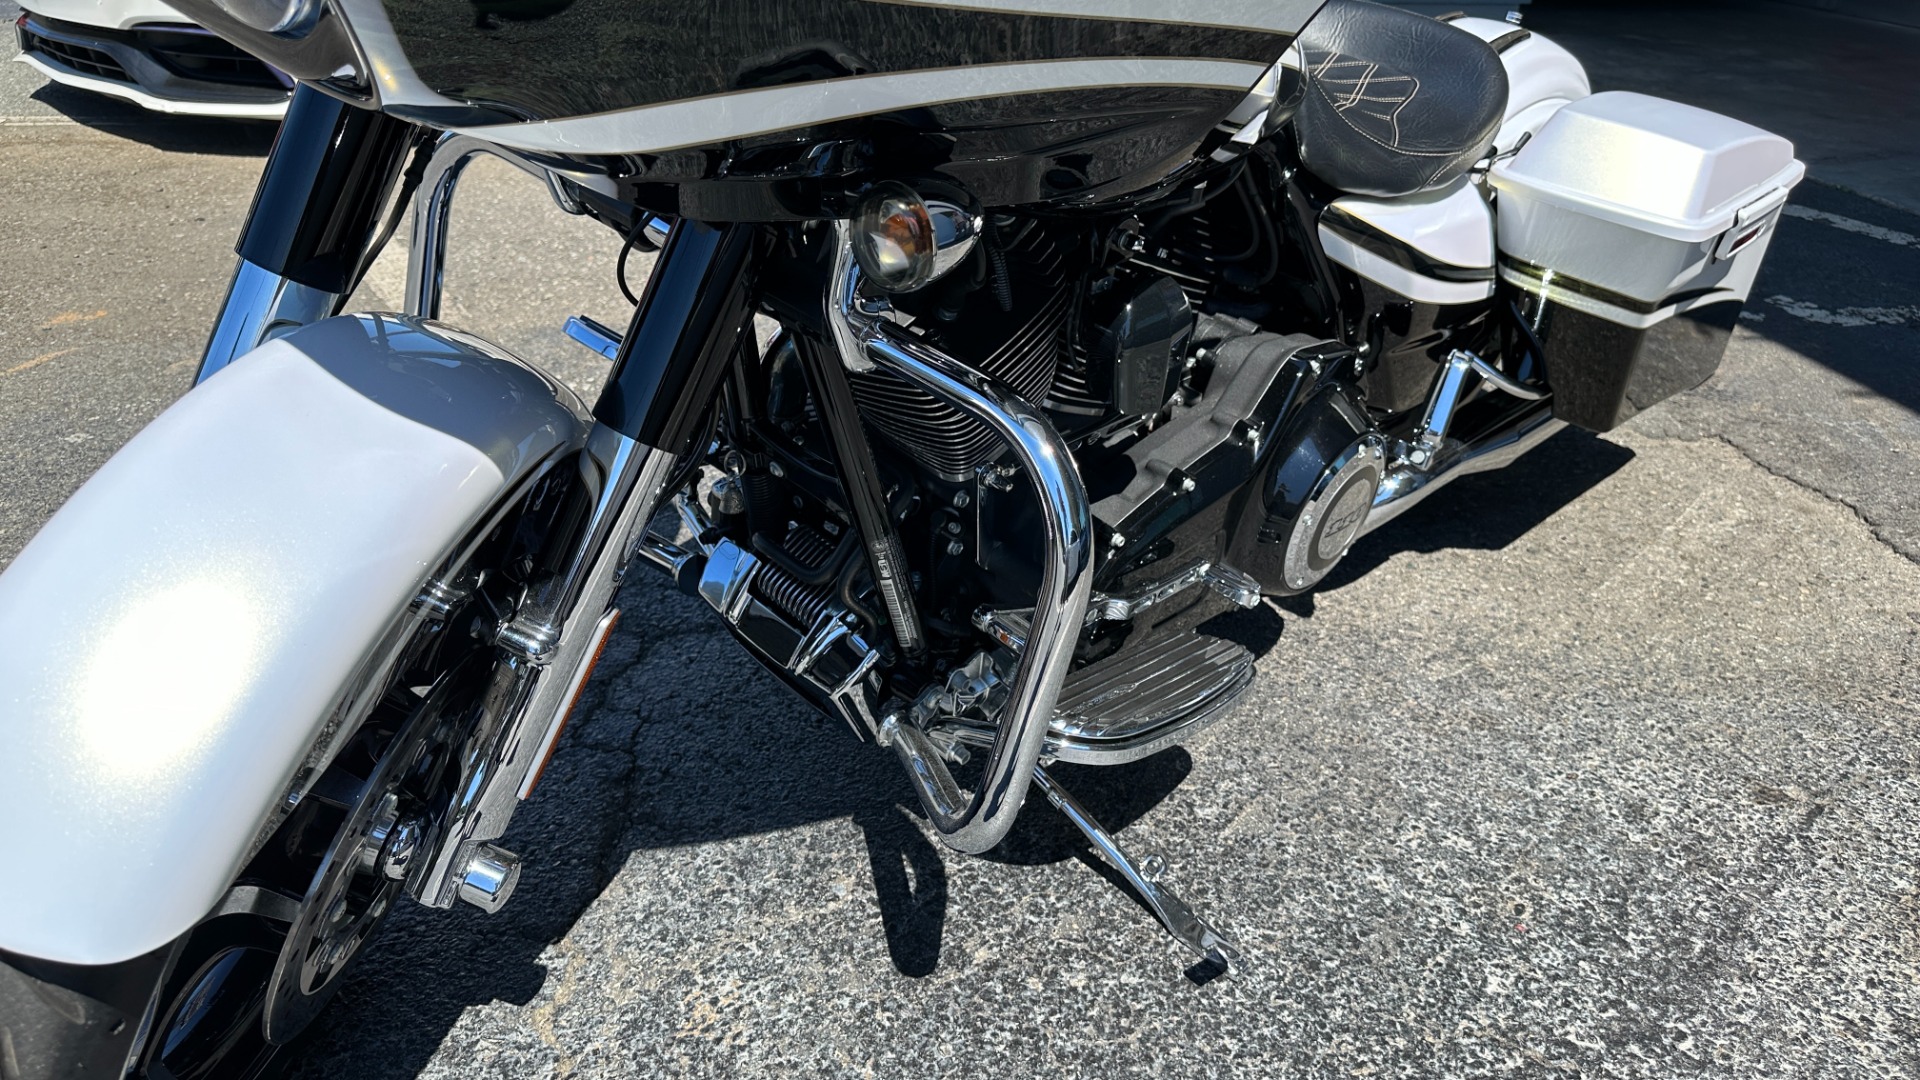 Used 2012 Harley Davidson FLTRXSE CVO Road Glide Custom CVO PAINT / RINEHART EXHAUST / SCREAMING EAGLE 110 ENGINE for sale $32,000 at Formula Imports in Charlotte NC 28227 19